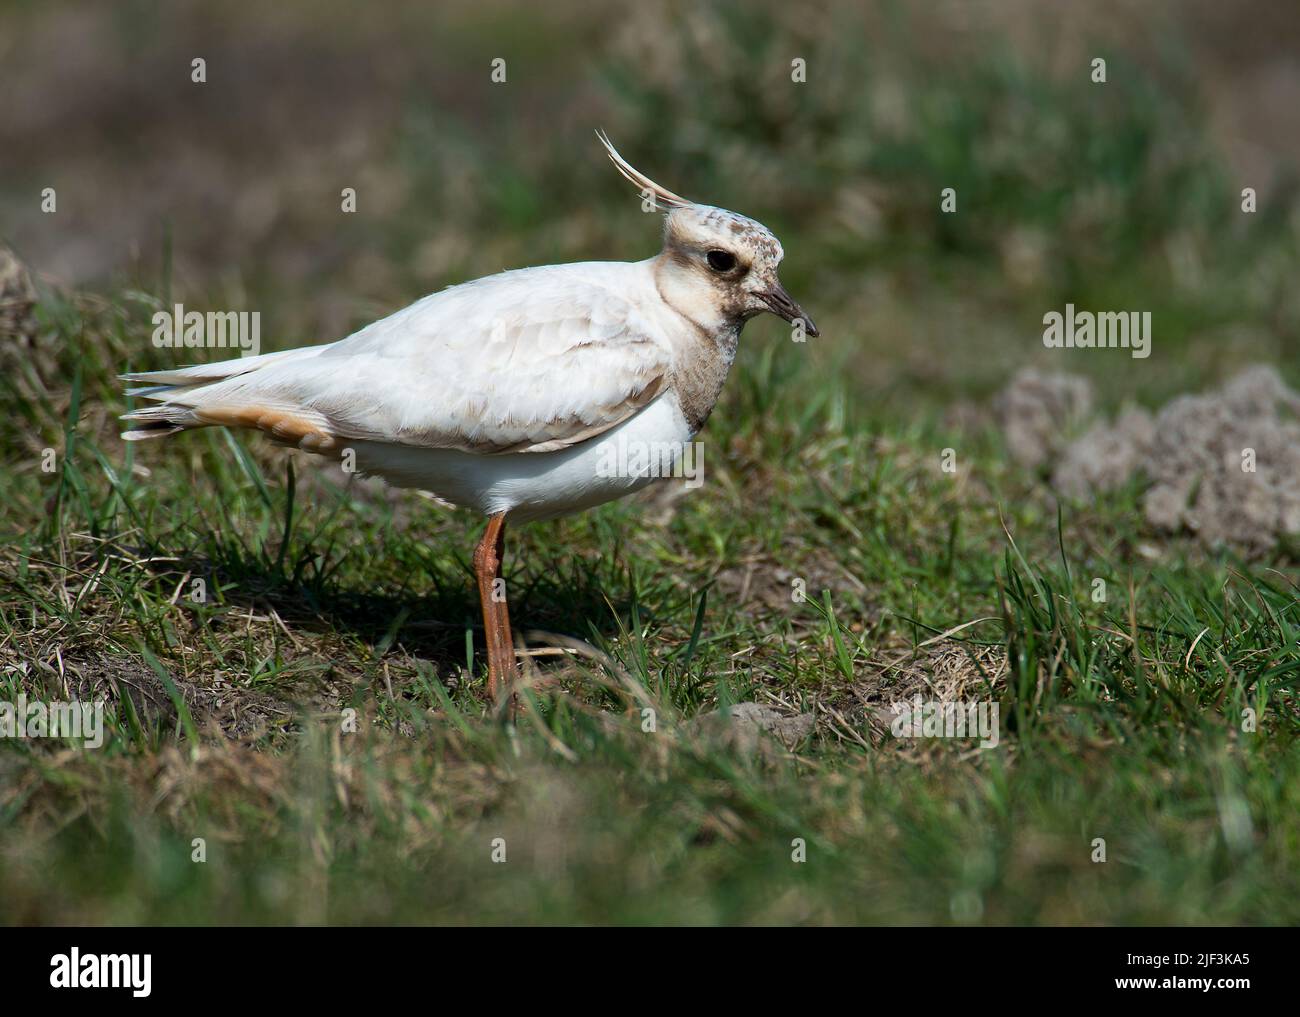 A leucistic mutant of Northern Lapwing (Vanellus vanellus) from Tipperne, Denmark. Stock Photo